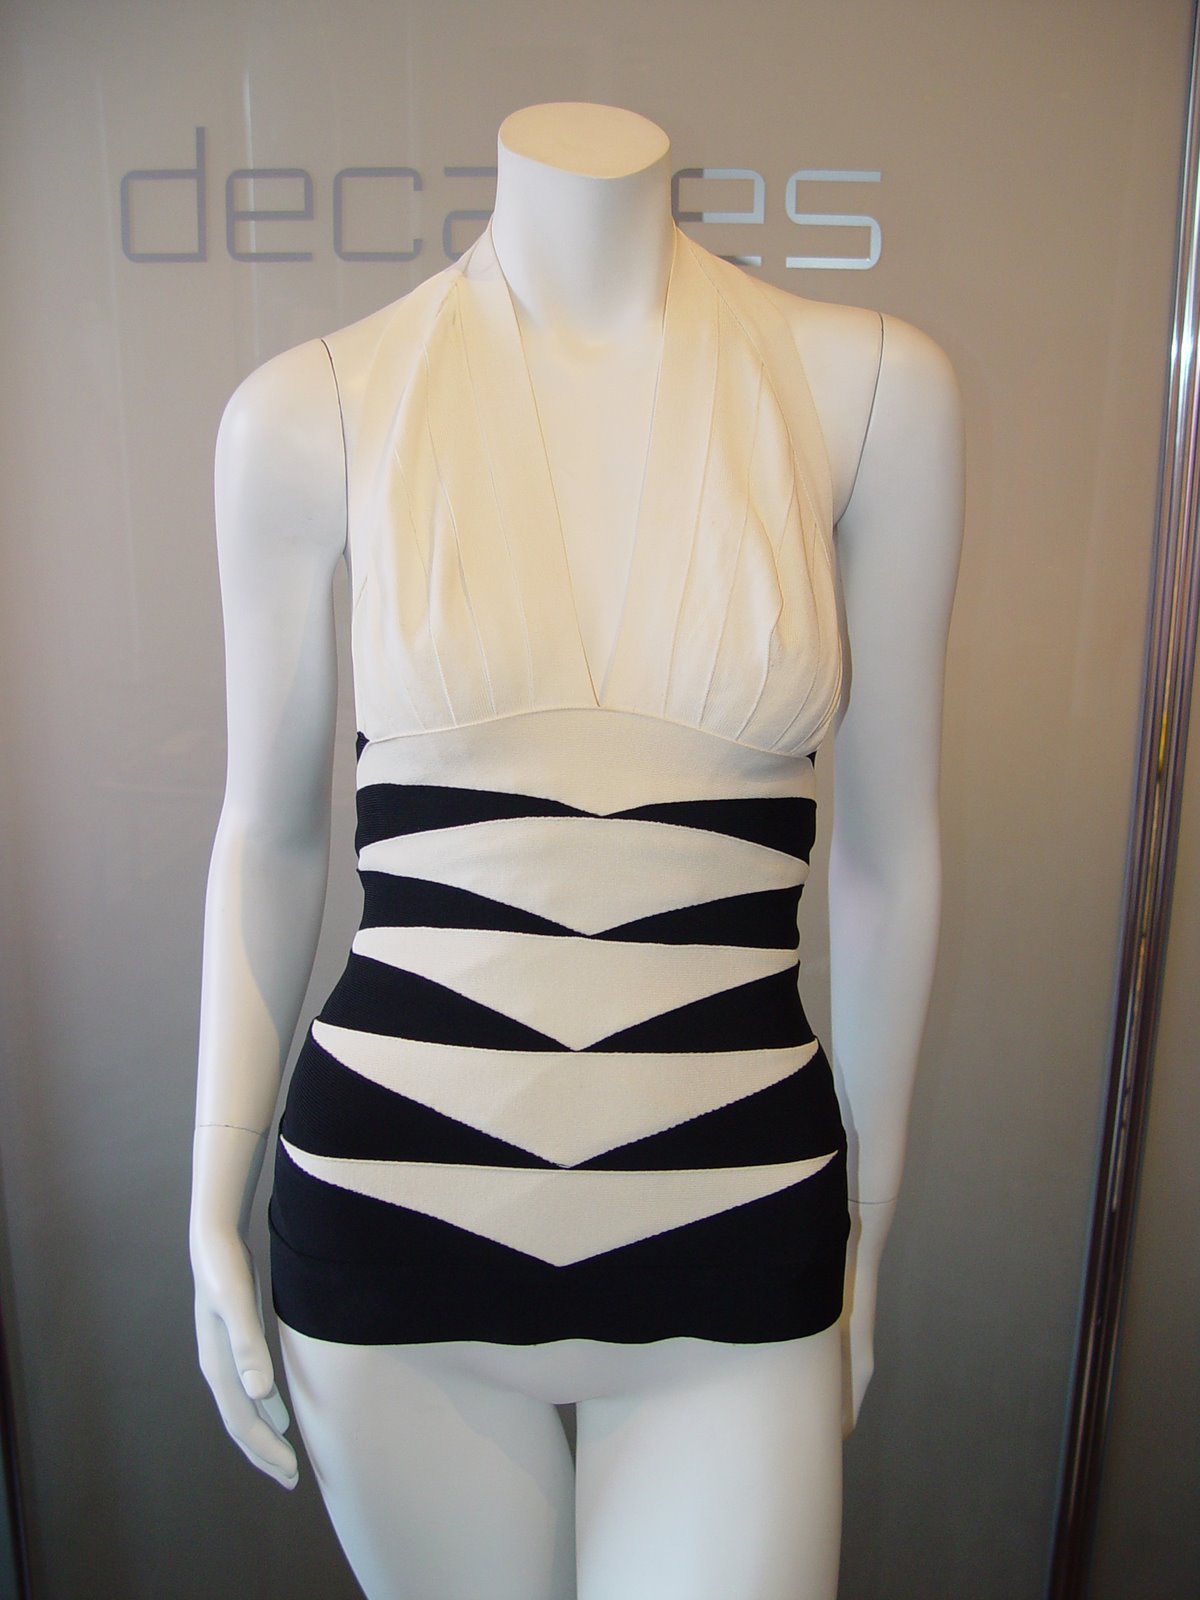 [HERVE+LEGER+COUTURE+BLACK+AND+WHITE+BANDAGE+TOP+MARKED+SIZE+S+EARLY+90S.JPG.JPG]